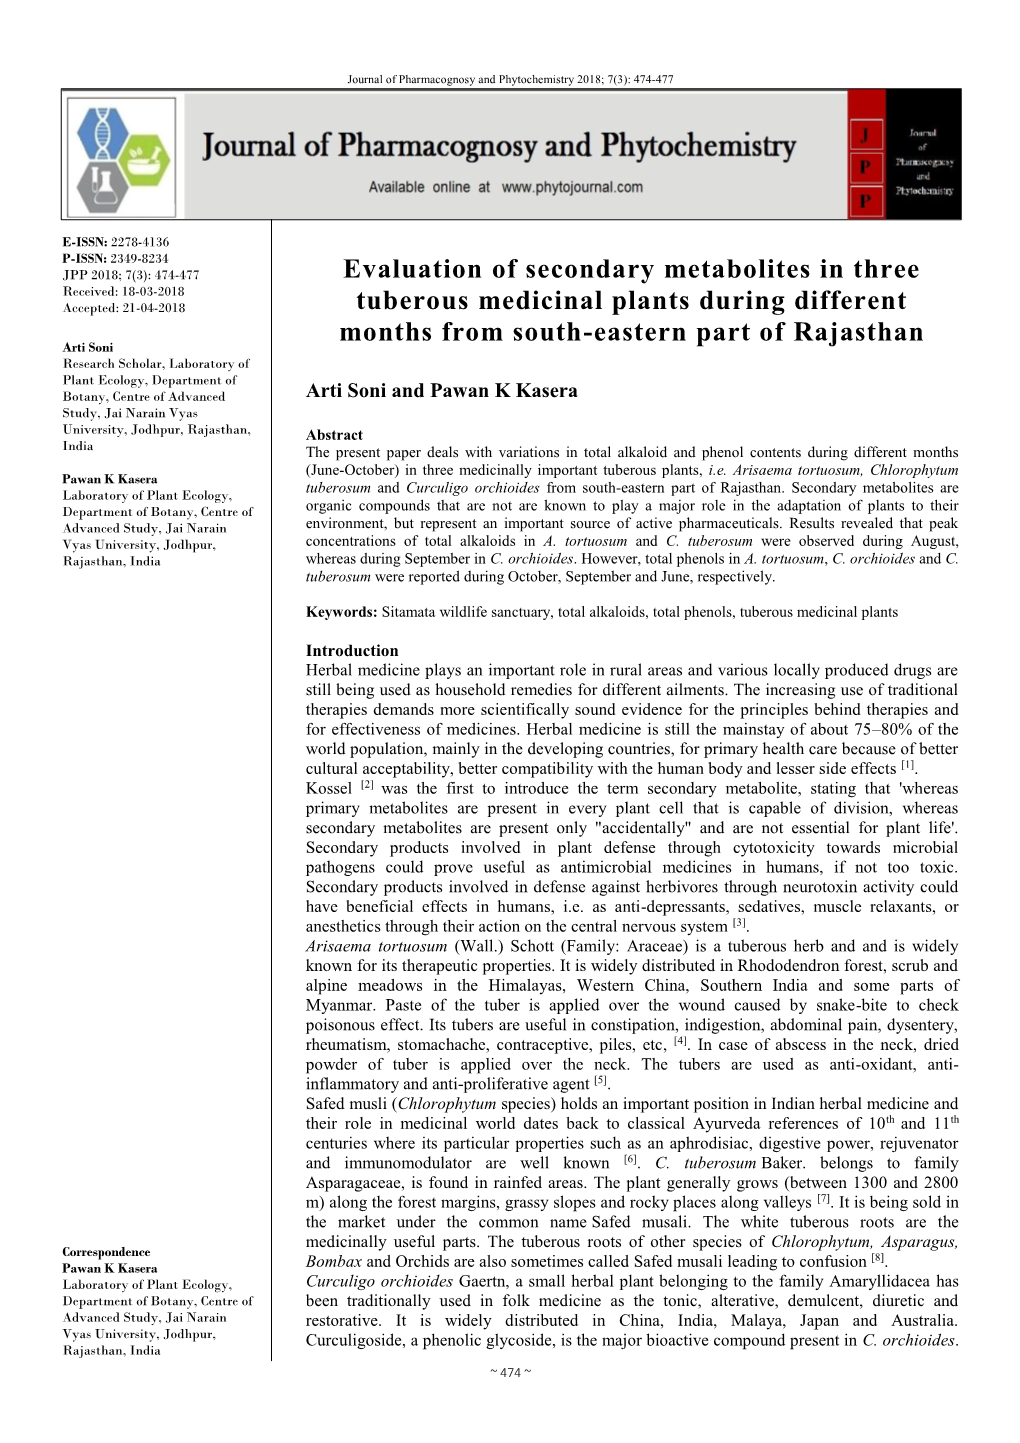 Evaluation of Secondary Metabolites in Three Tuberous Medicinal Plants